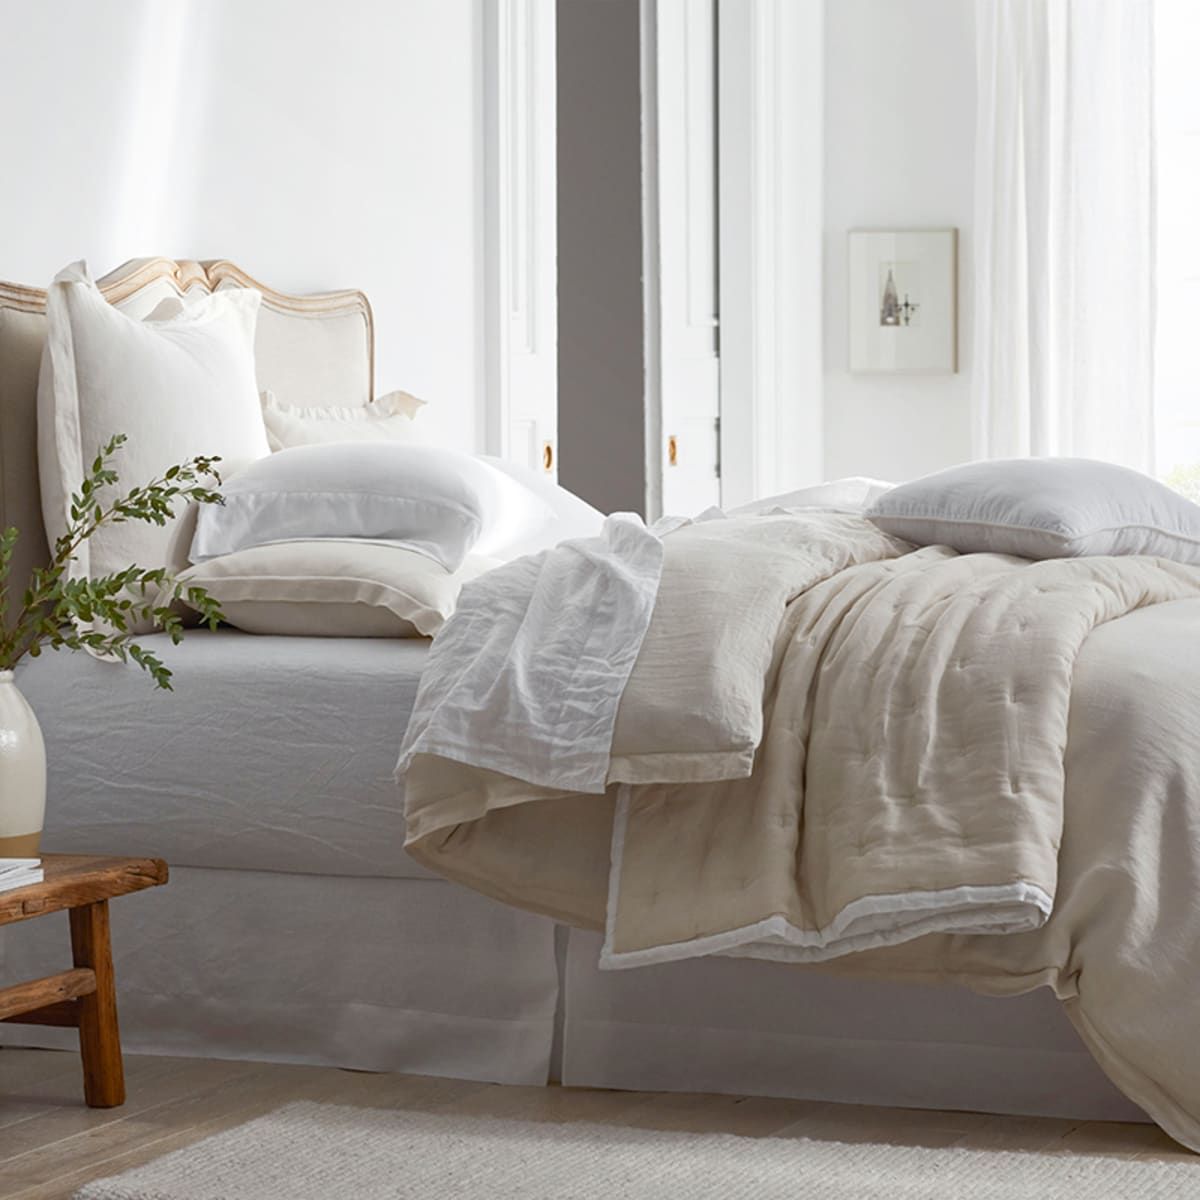 The best bed linen to buy now